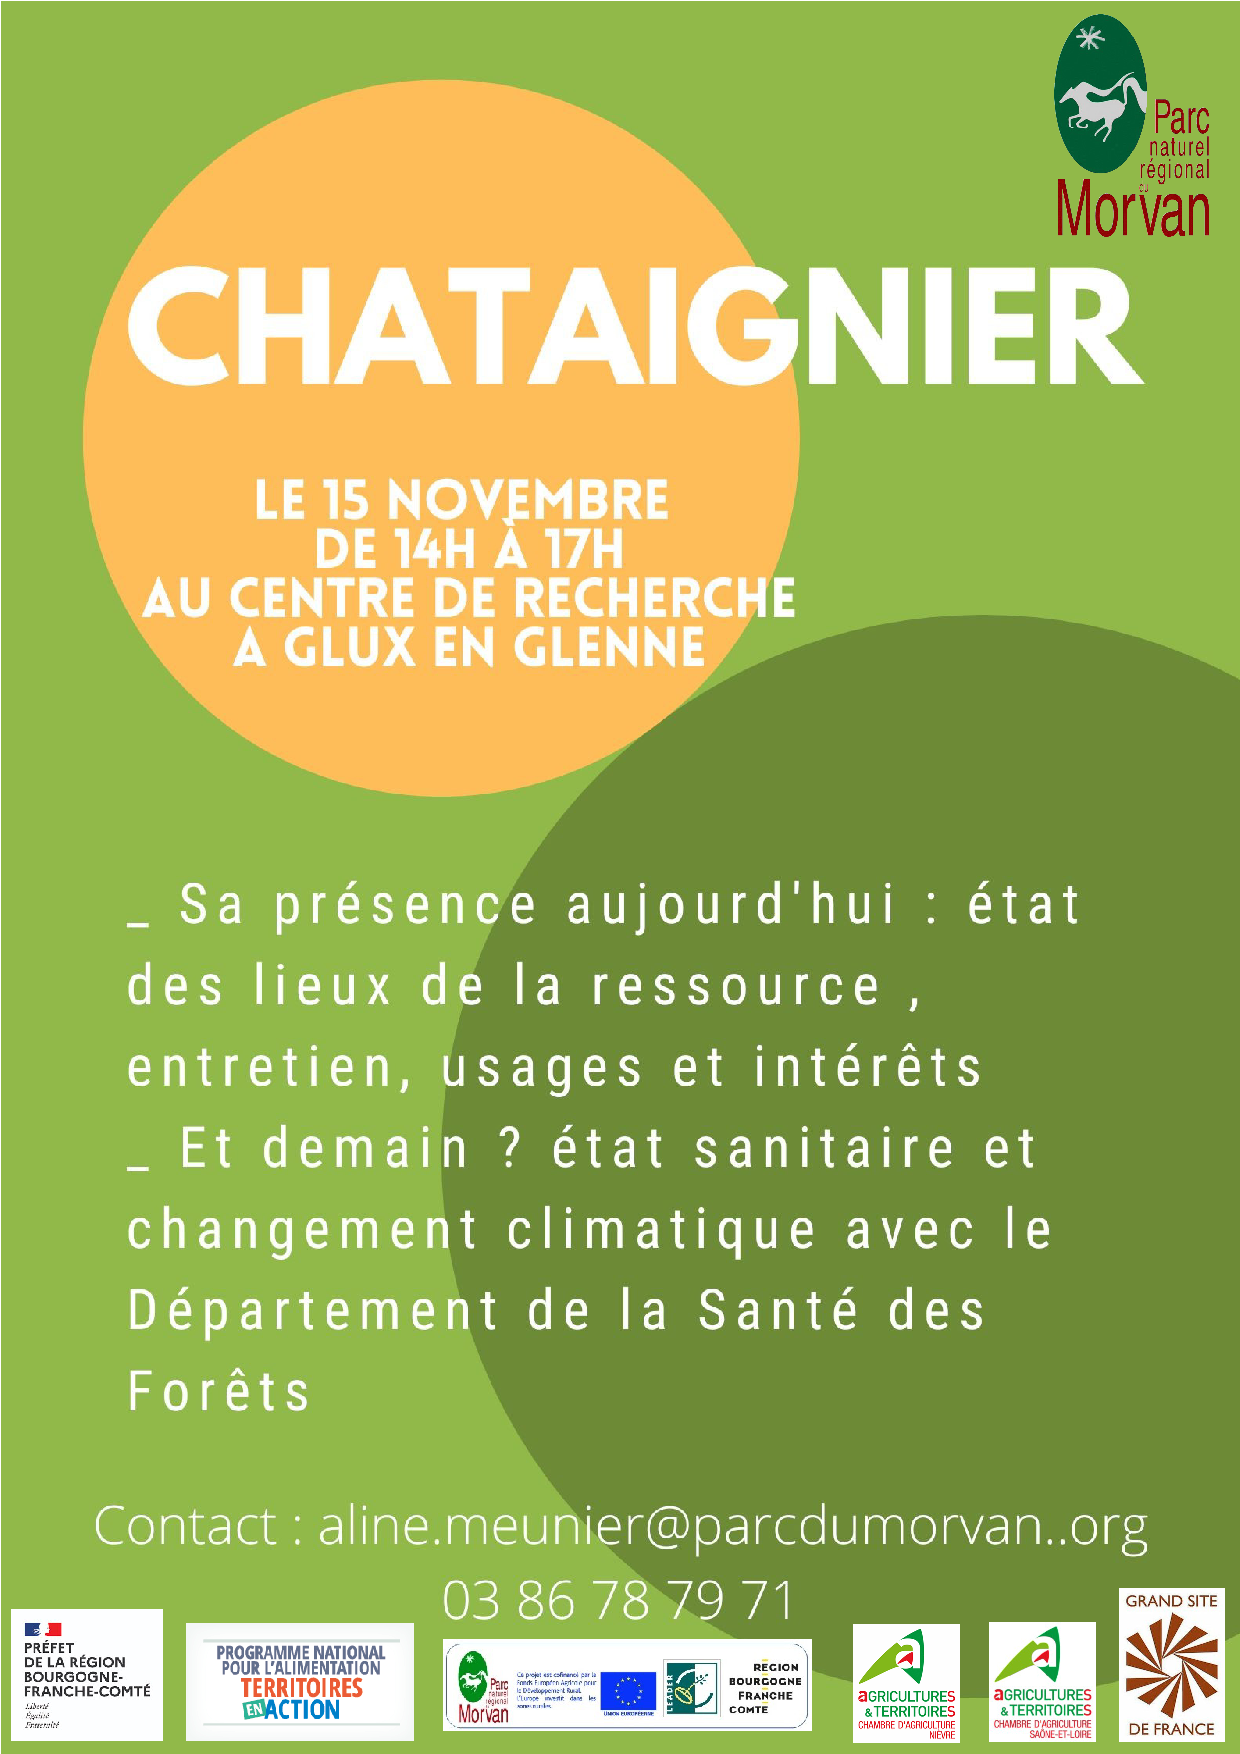 Chataigniers